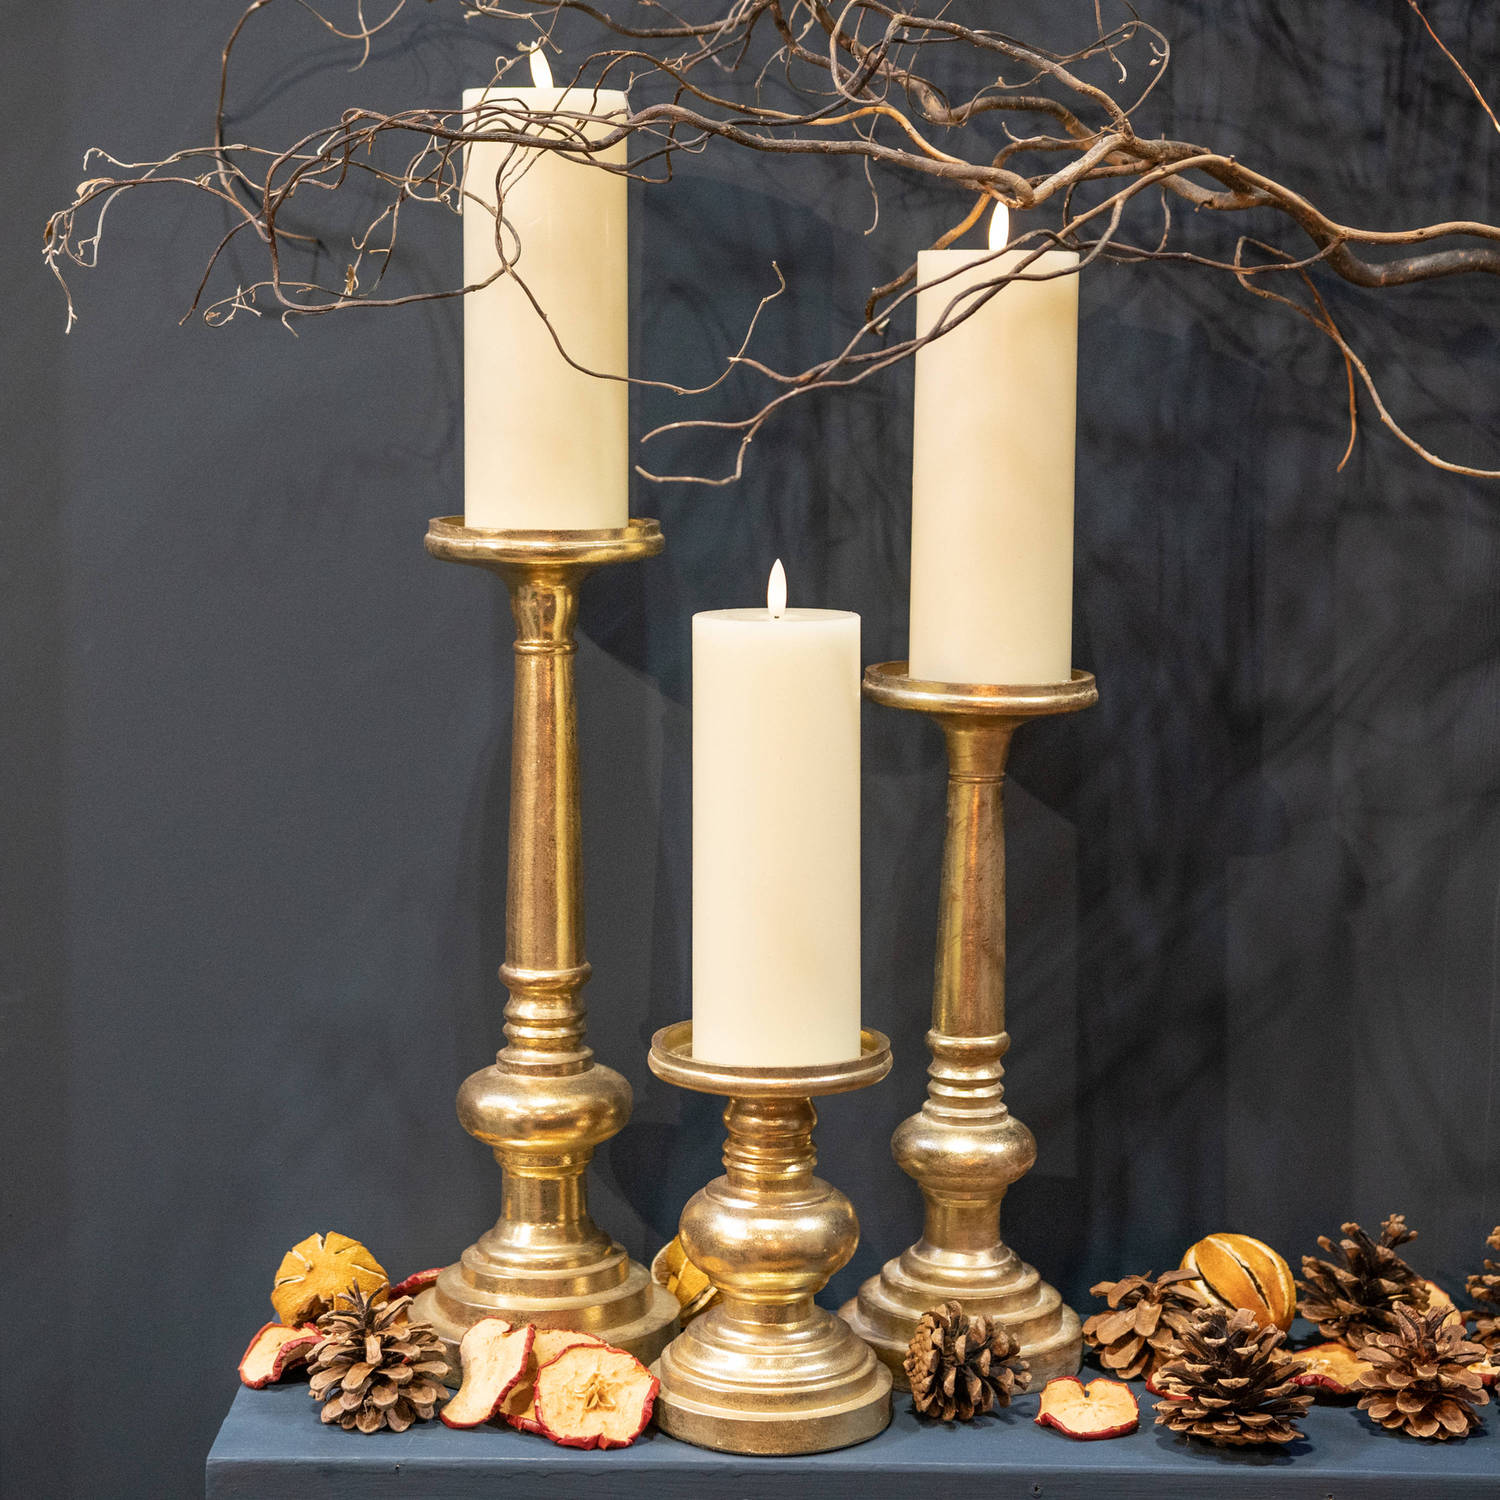 Antique Brass Effect Tall Candle Holder - Image 3